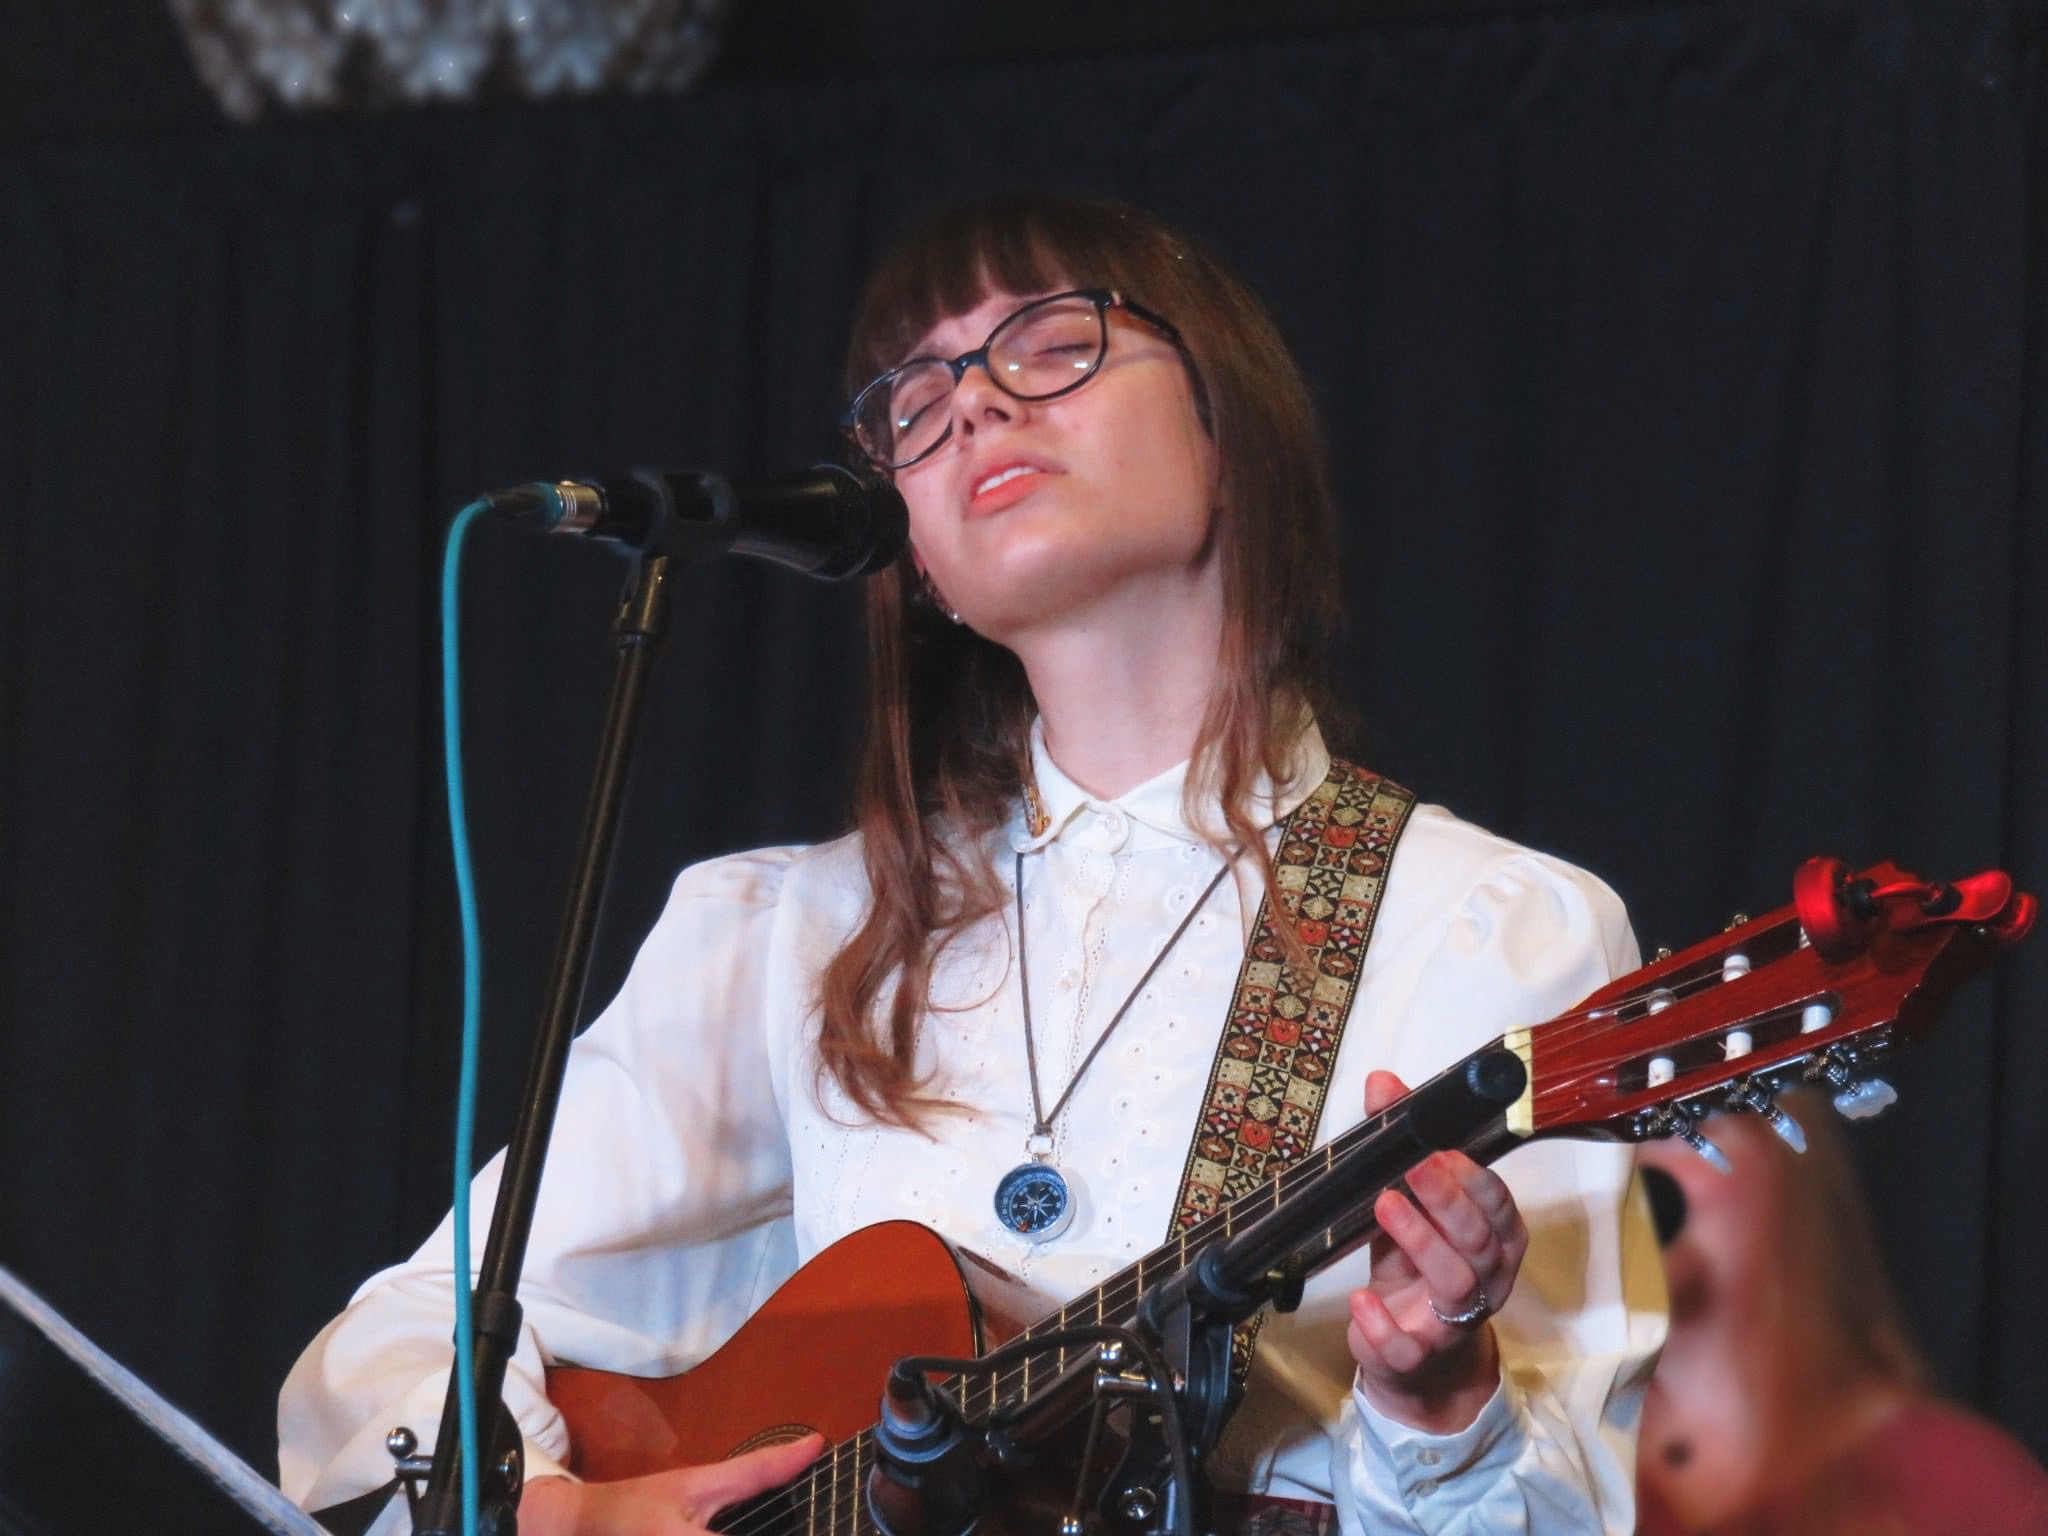 Lauren sings into a microphone with her eyes closed. She is playing a guitar and is wearing an ivory buttoned-up blouse, along with her compass necklace.